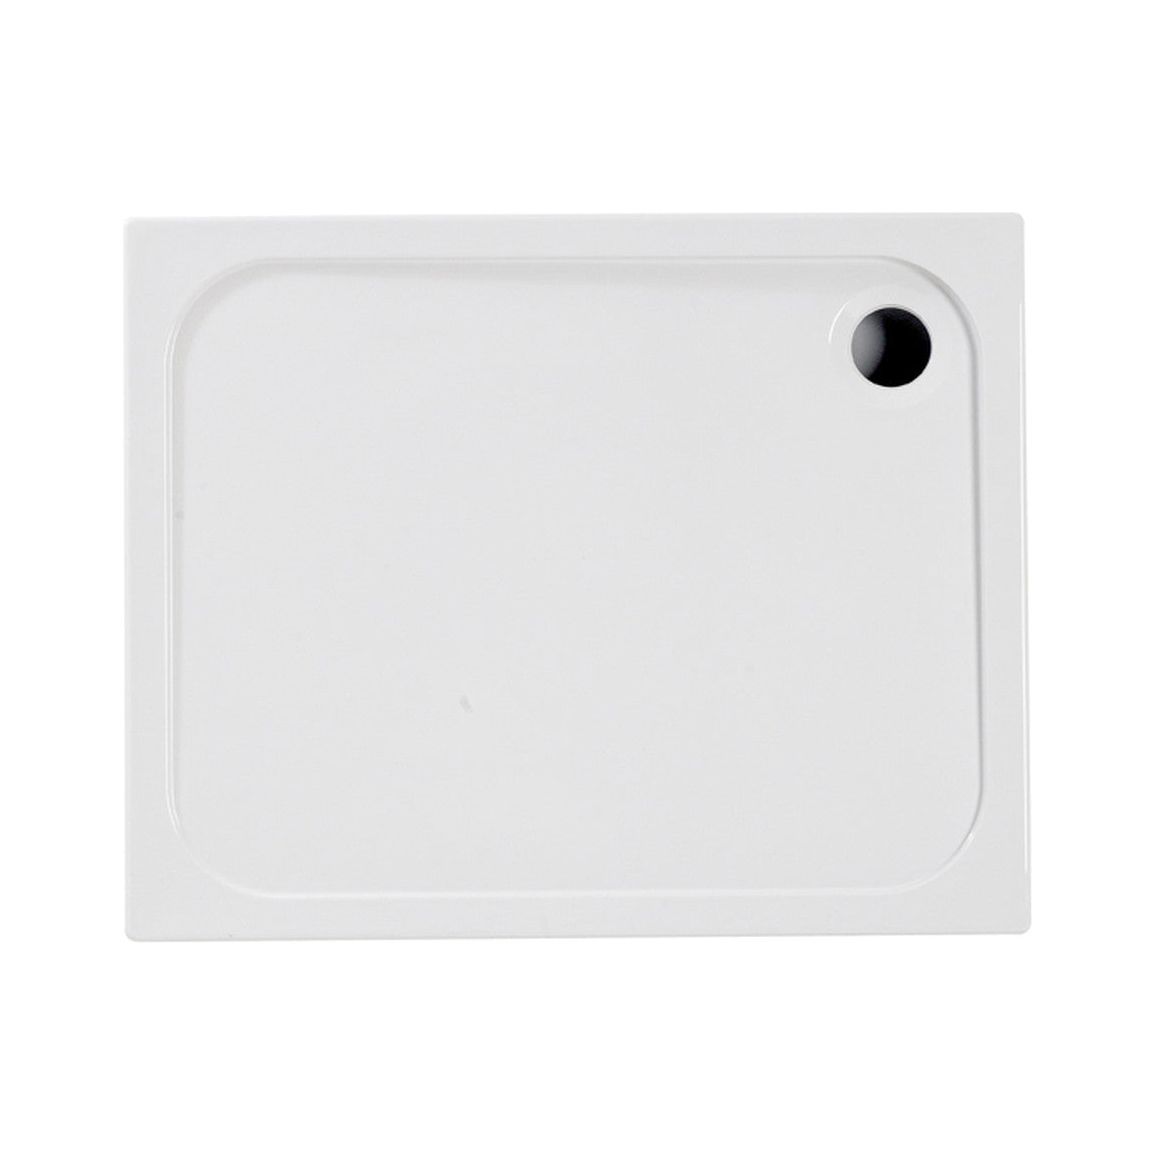 45mm Low Profile 1100x900mm Rectangular Tray & Waste